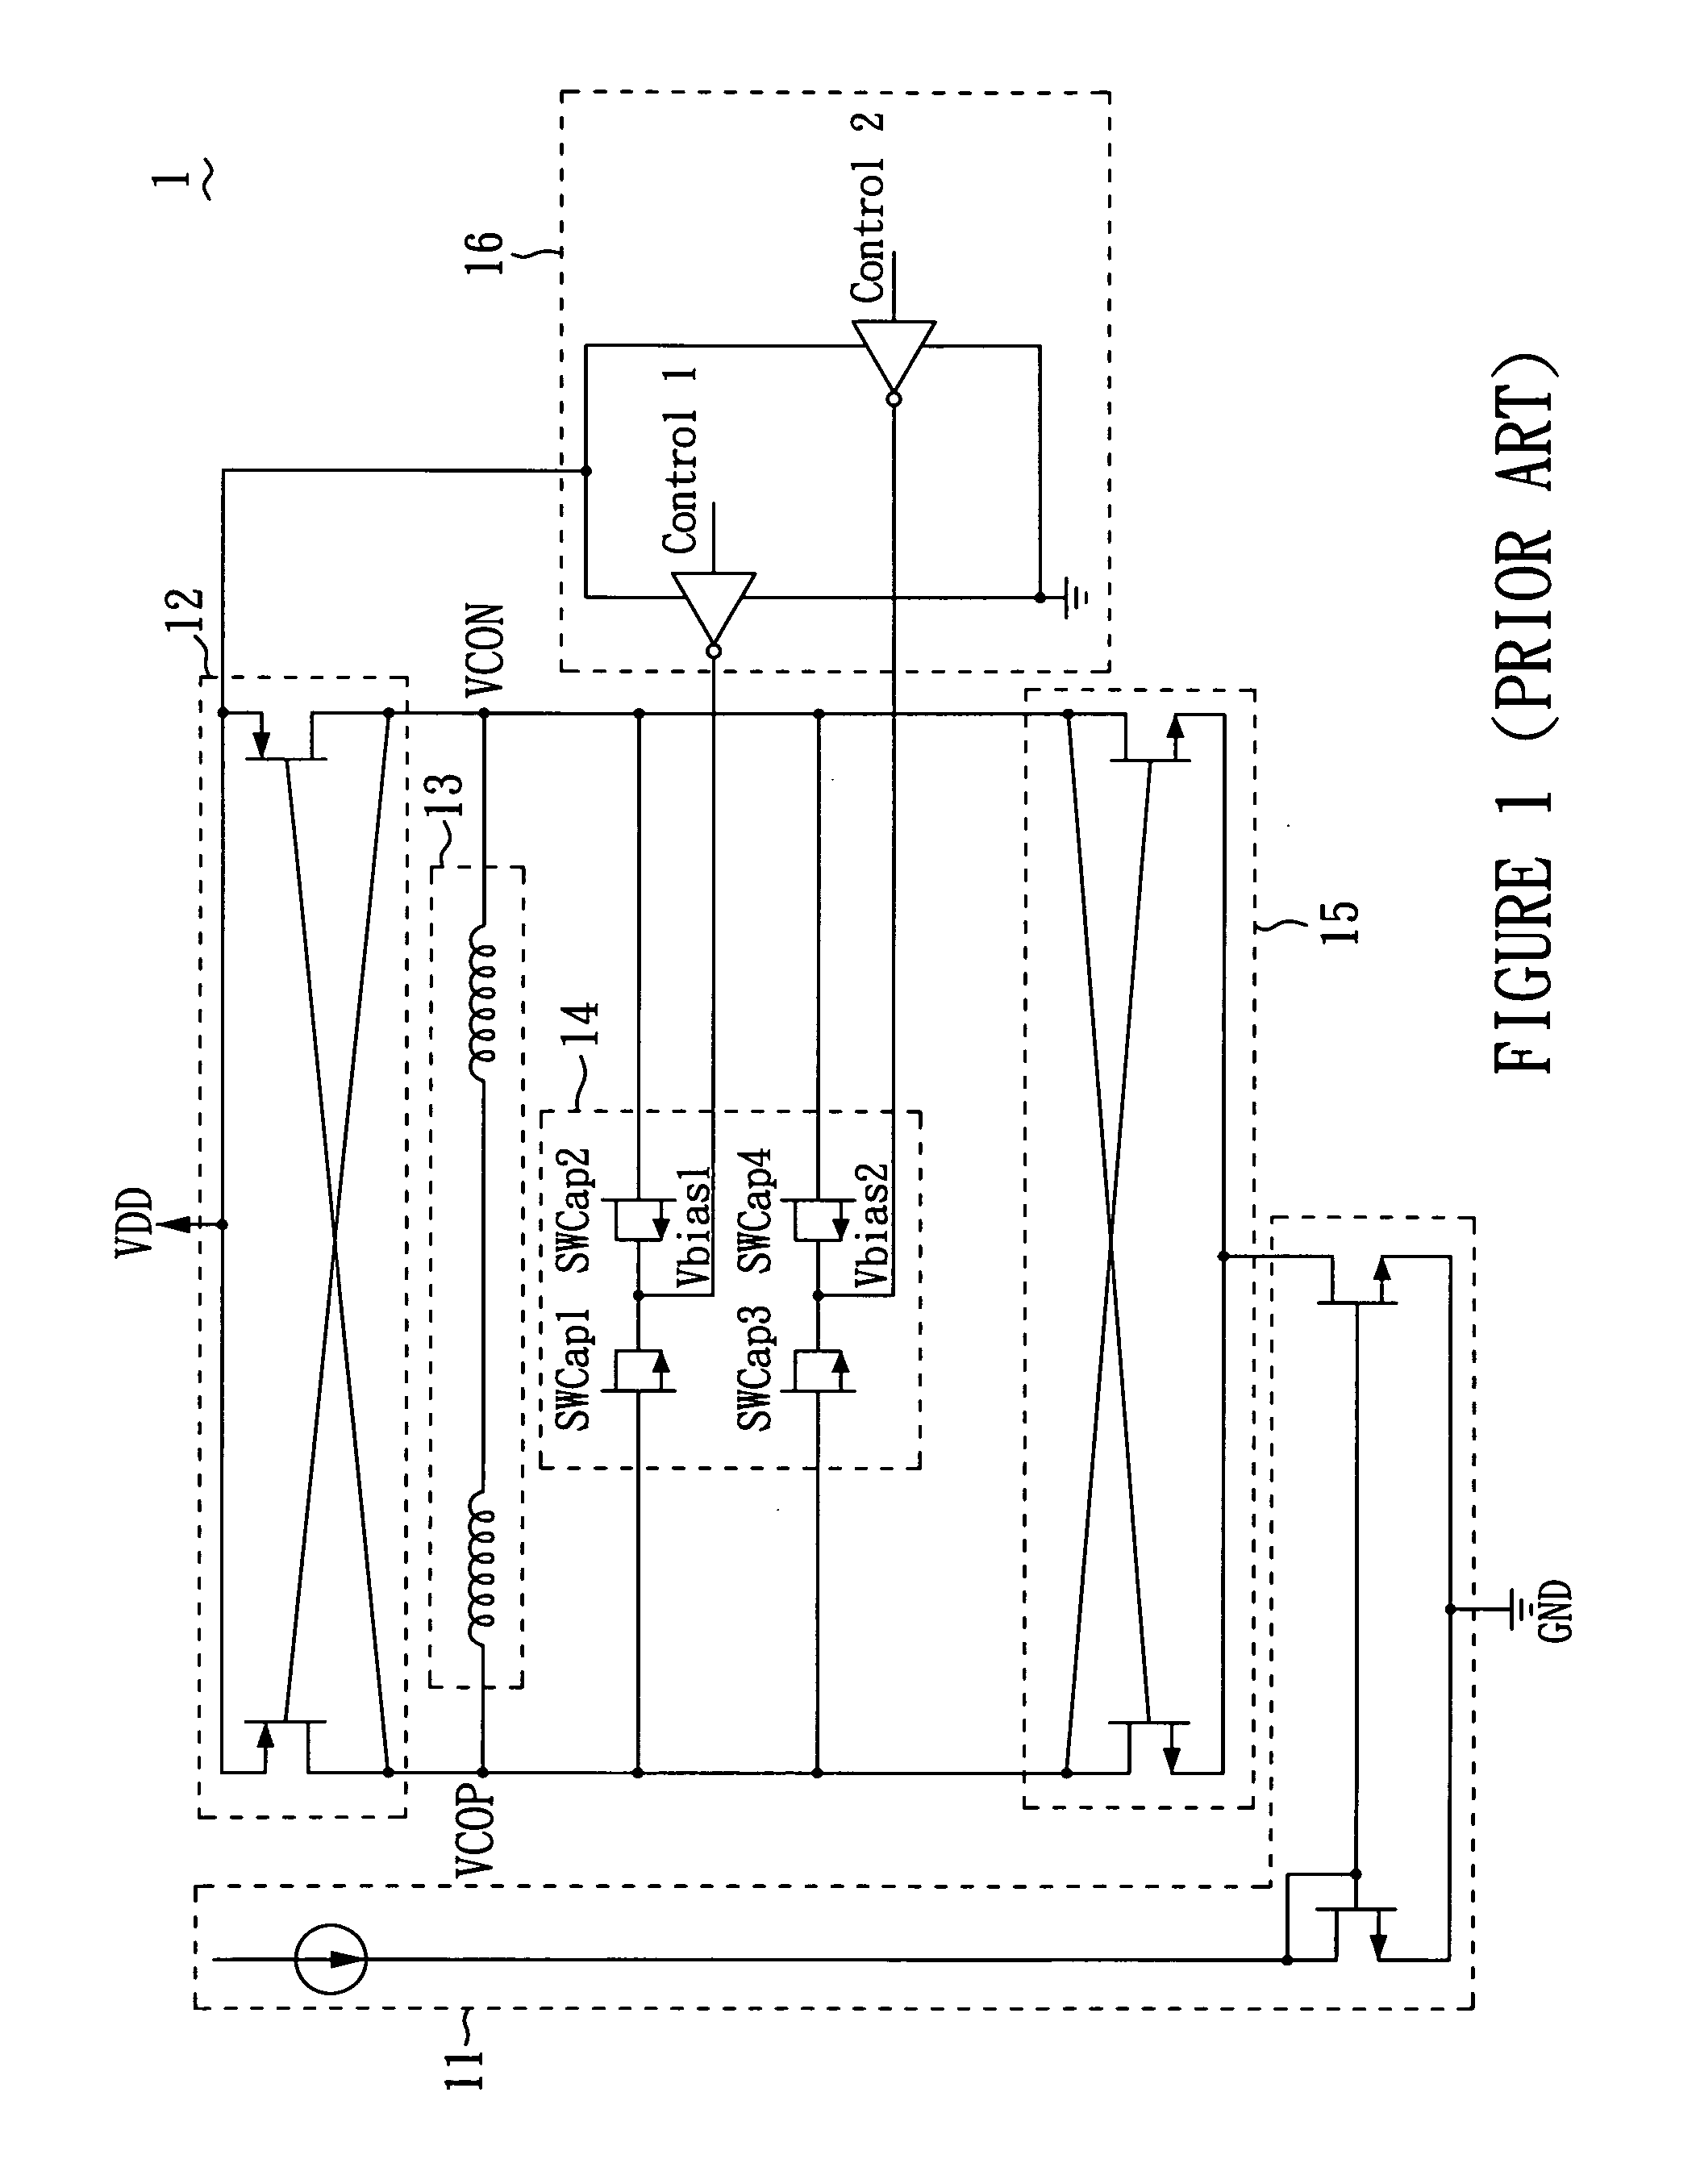 CMOS cross-coupled differential voltage controlled oscillator